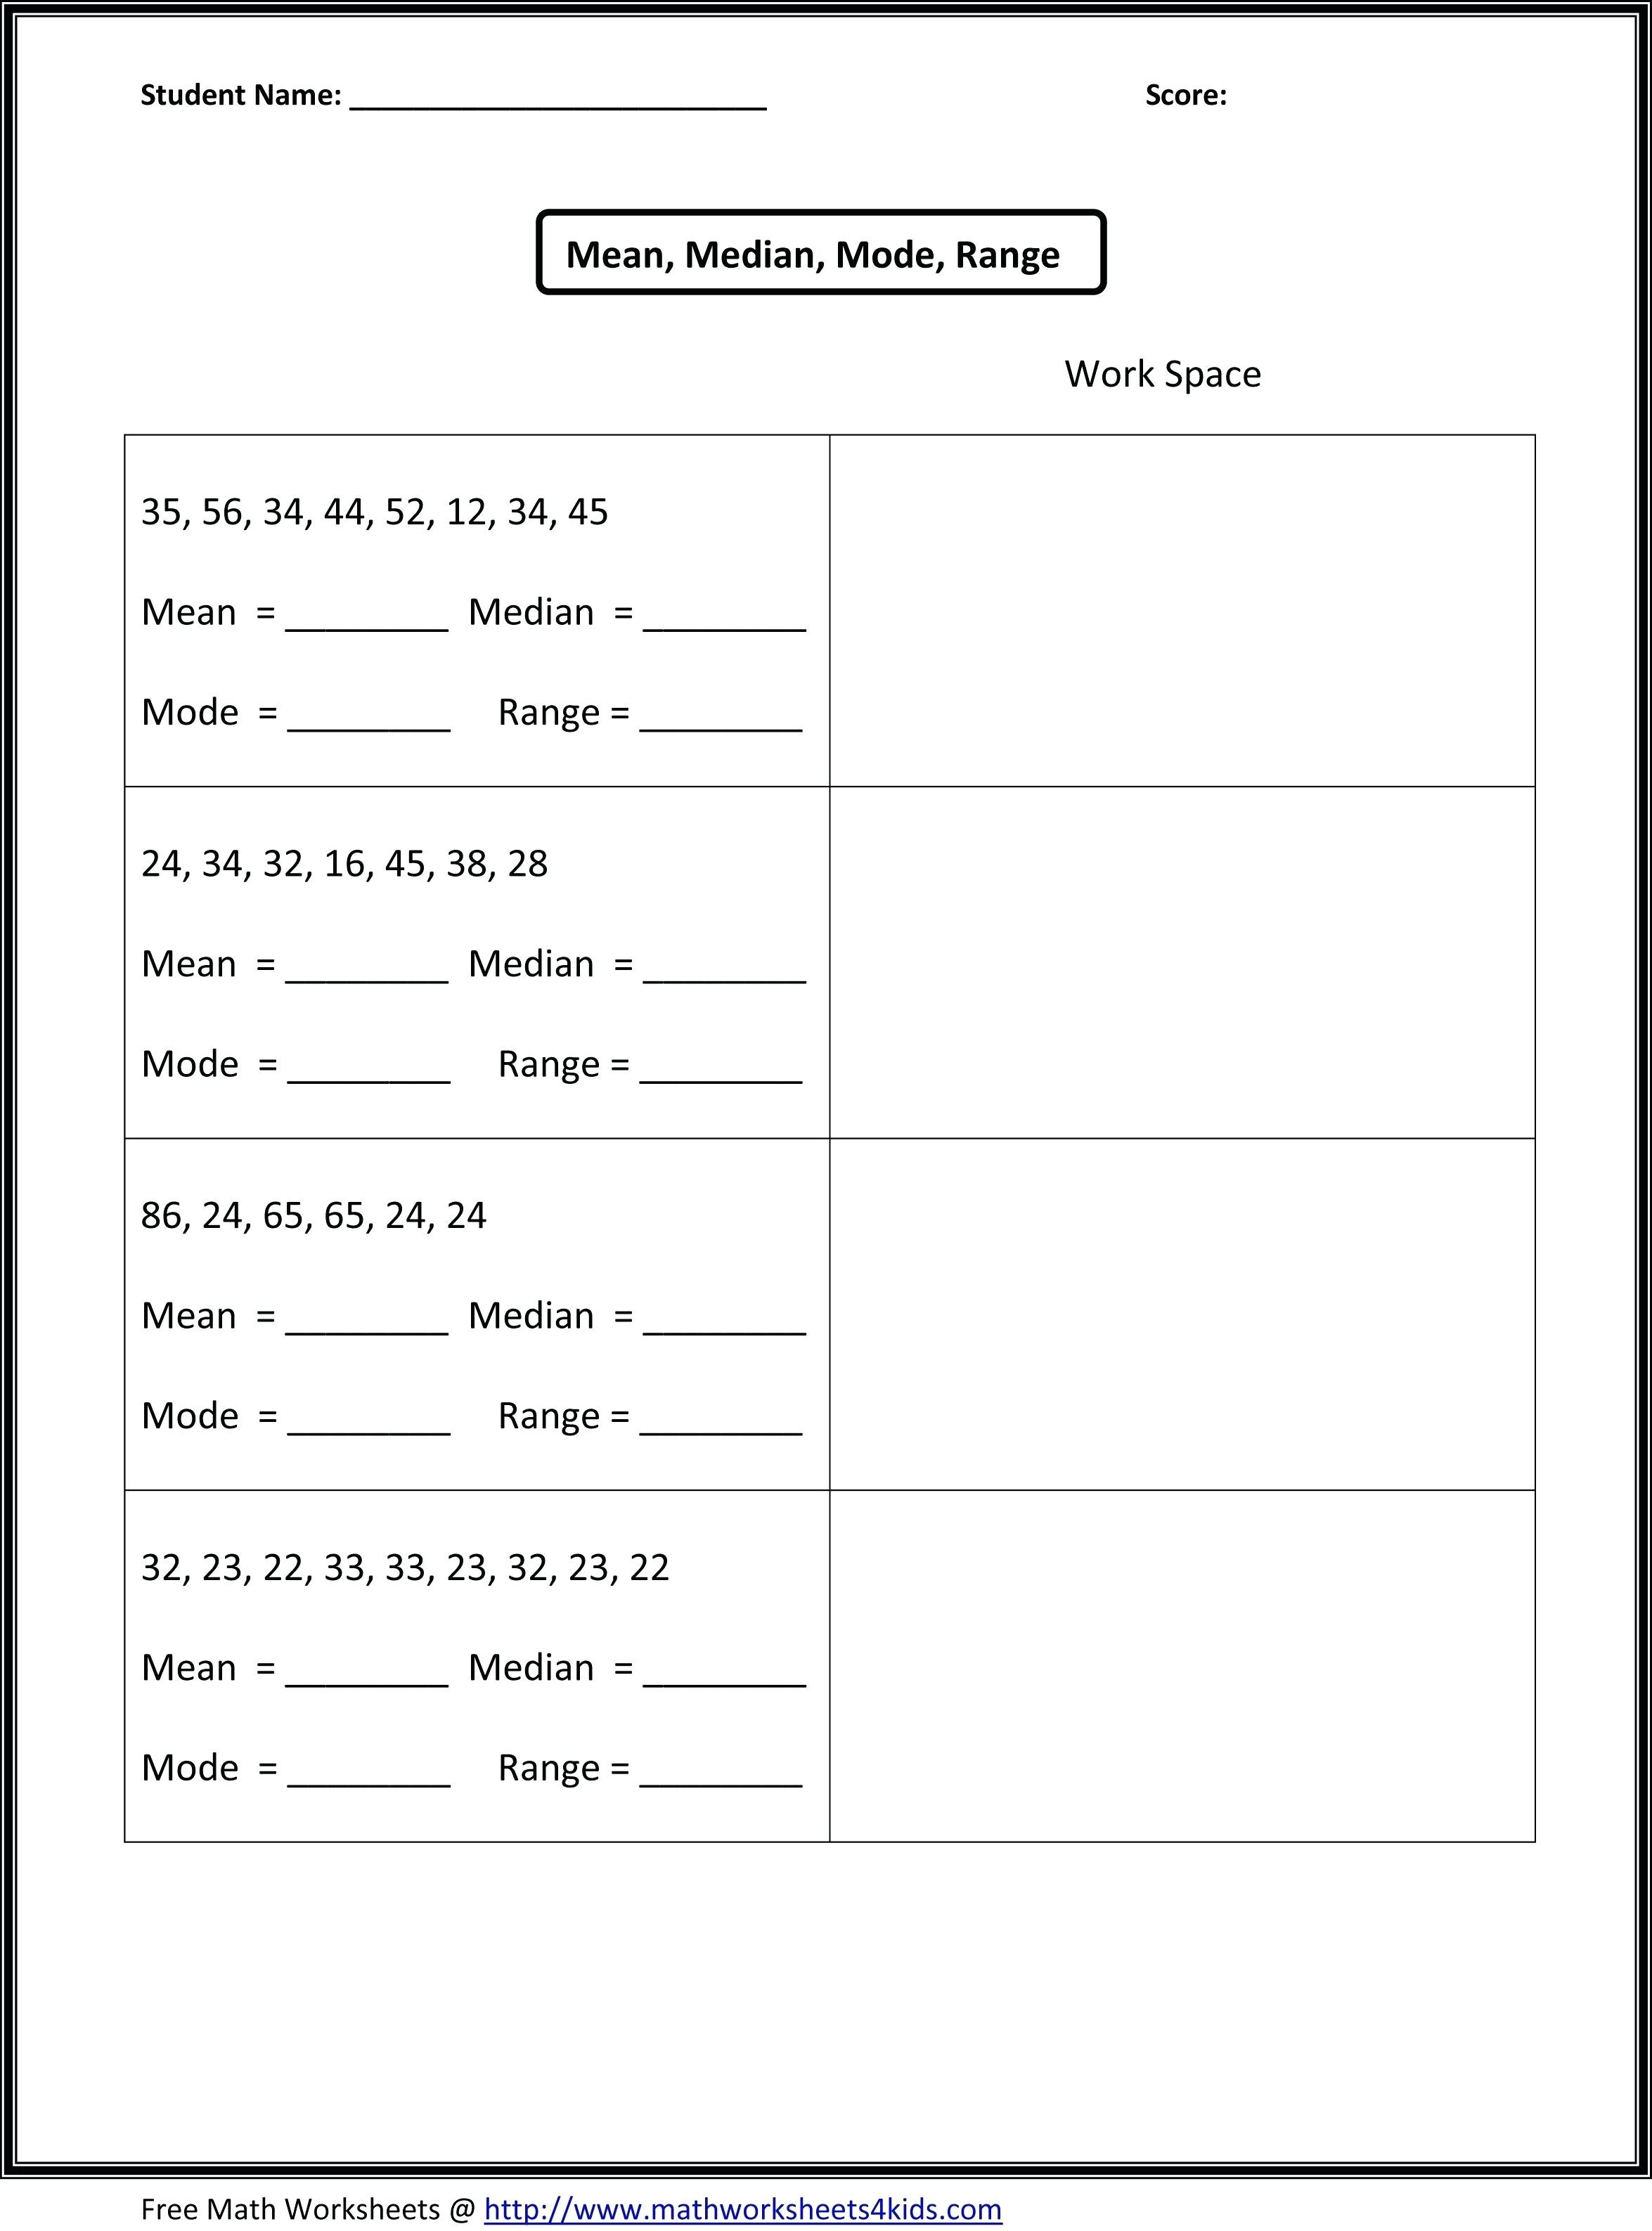 Frequency Table Worksheets 3rd Grade Tally and Frequency Table Worksheets